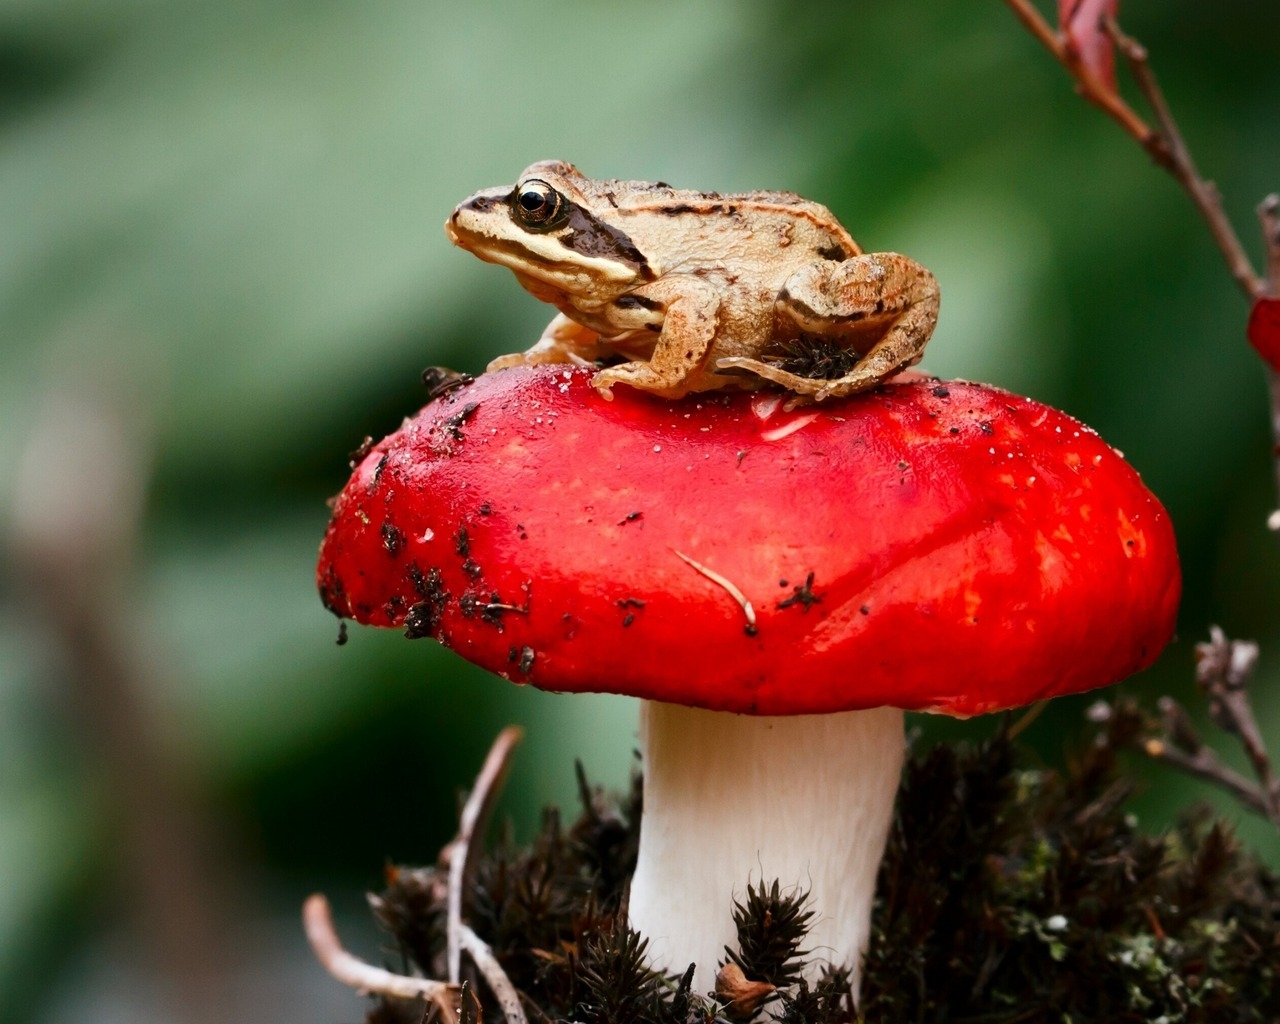 Frog Sitting on a Red Mushroom for 1280 x 1024 resolution